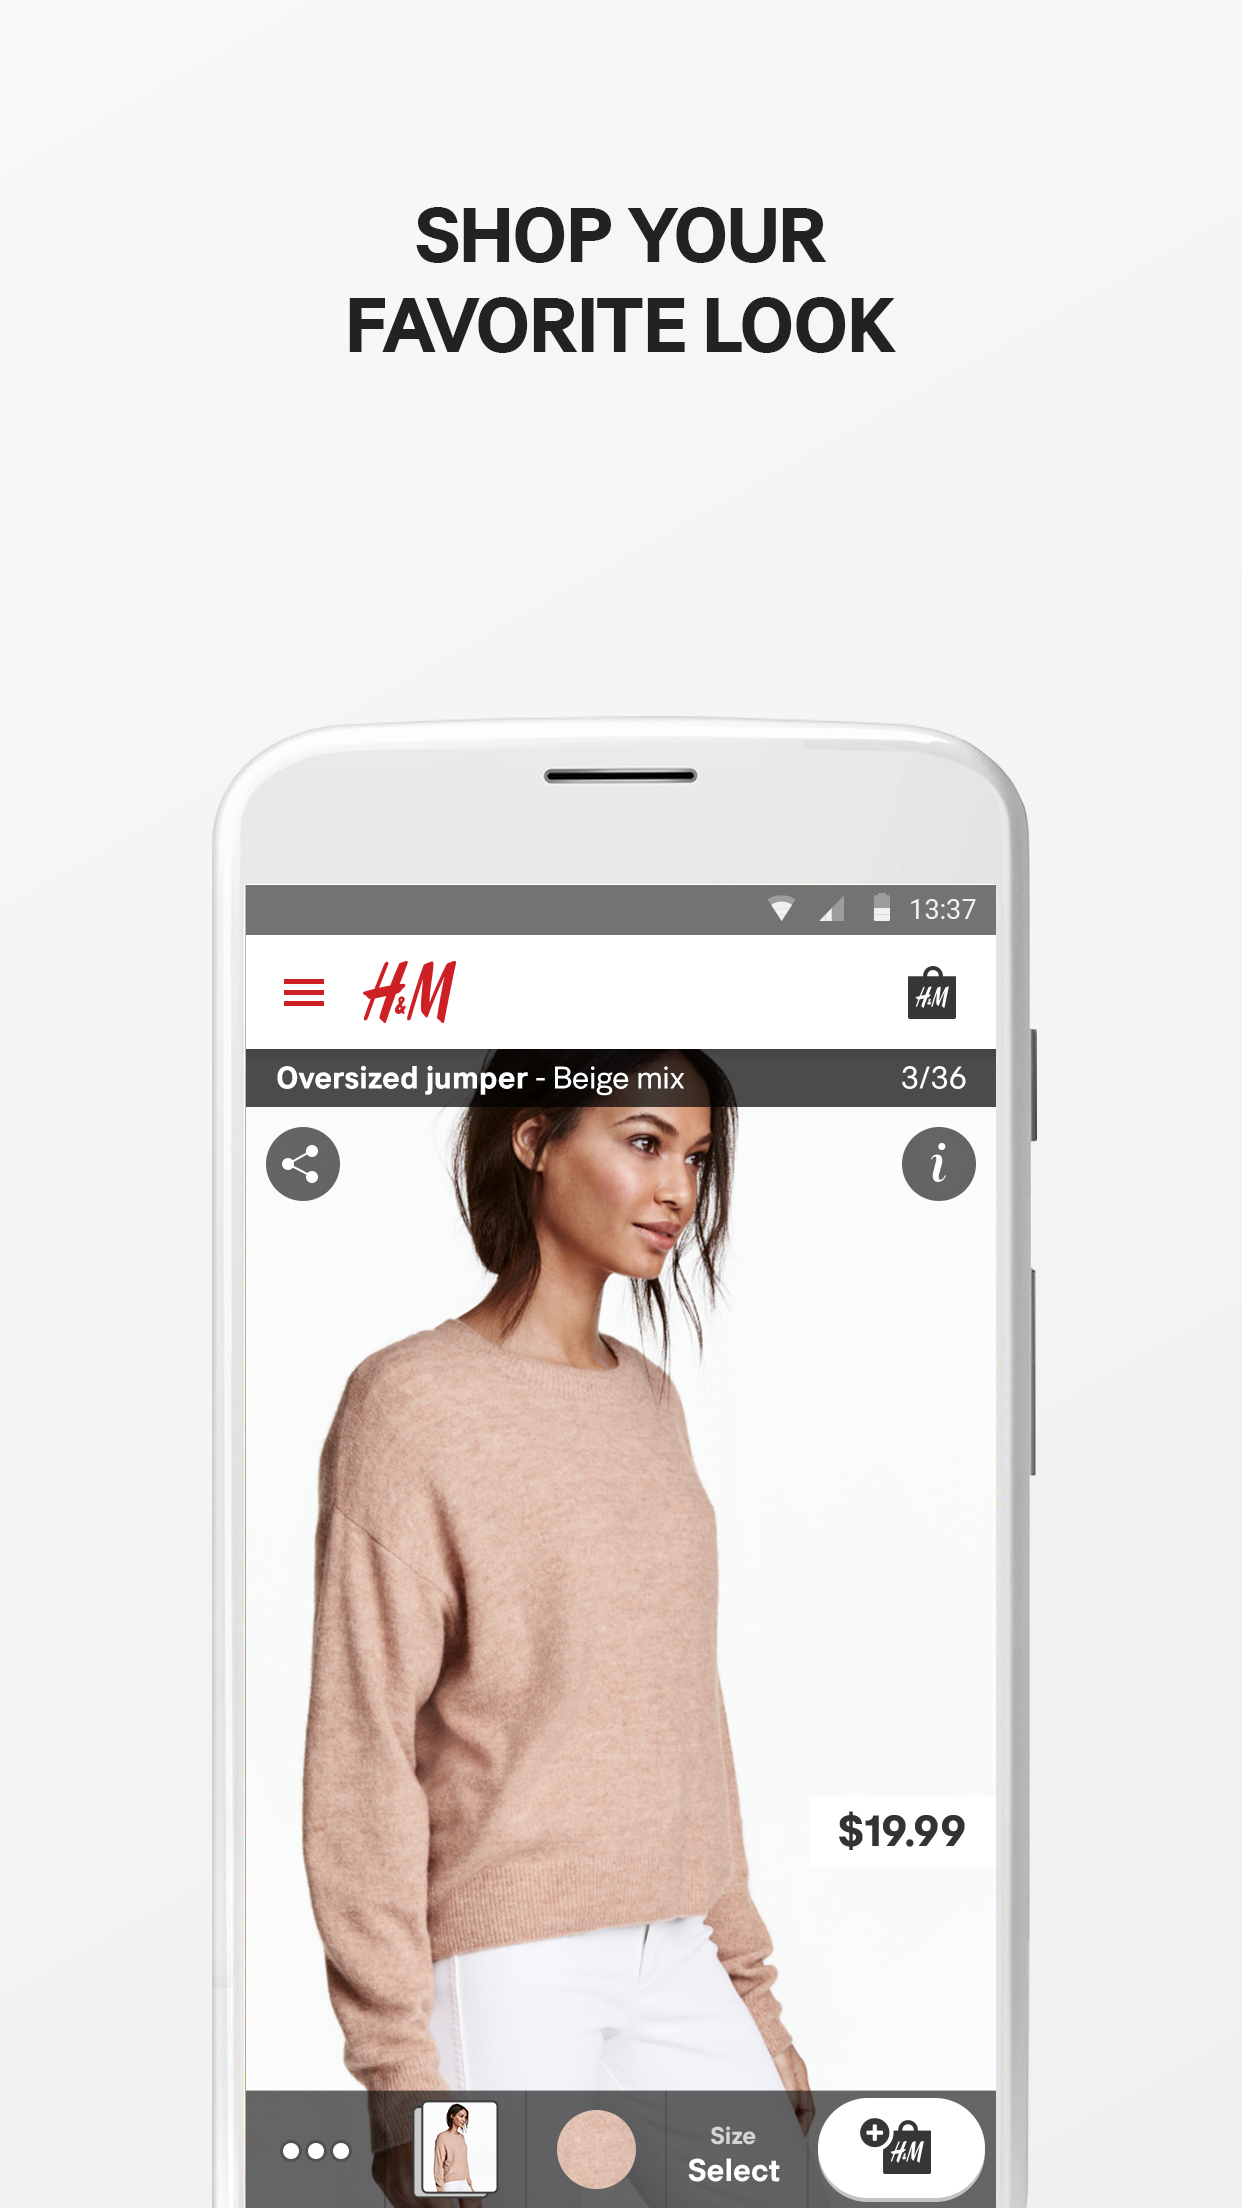 H&M APK 2.49.0 for Android – Download H&M APK Latest Version from APKFab.com